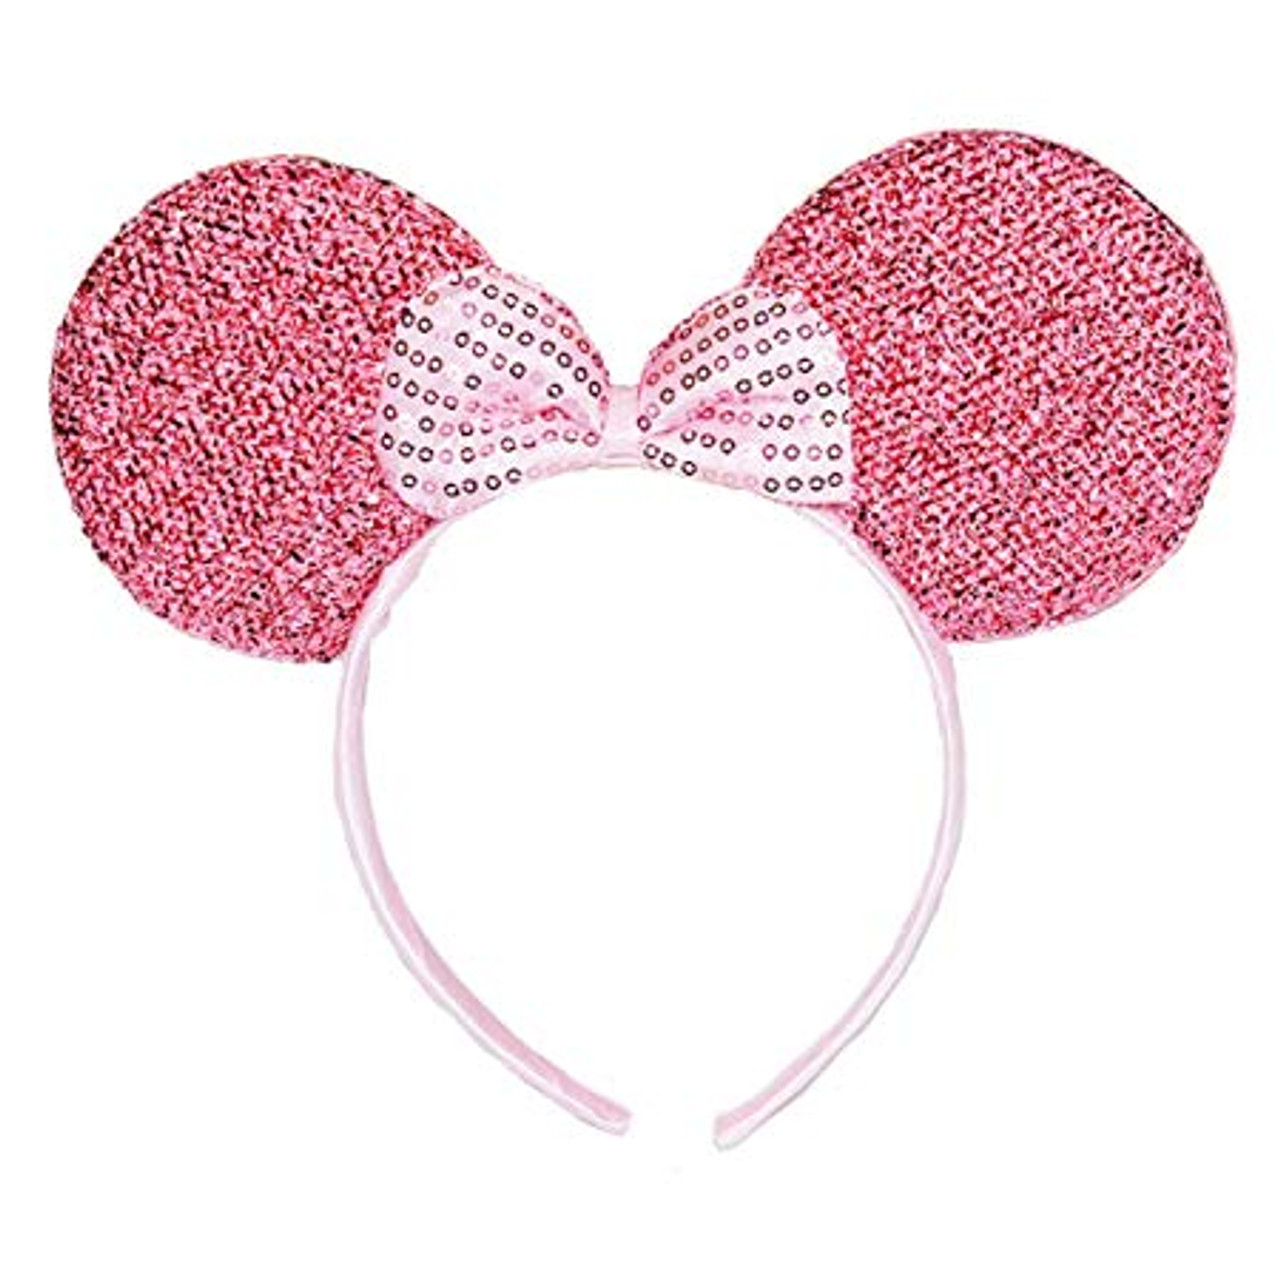 12 Minnie Mouse Ears Headbands PINK Bows Sparkly Party Favors Lot Costume Black 